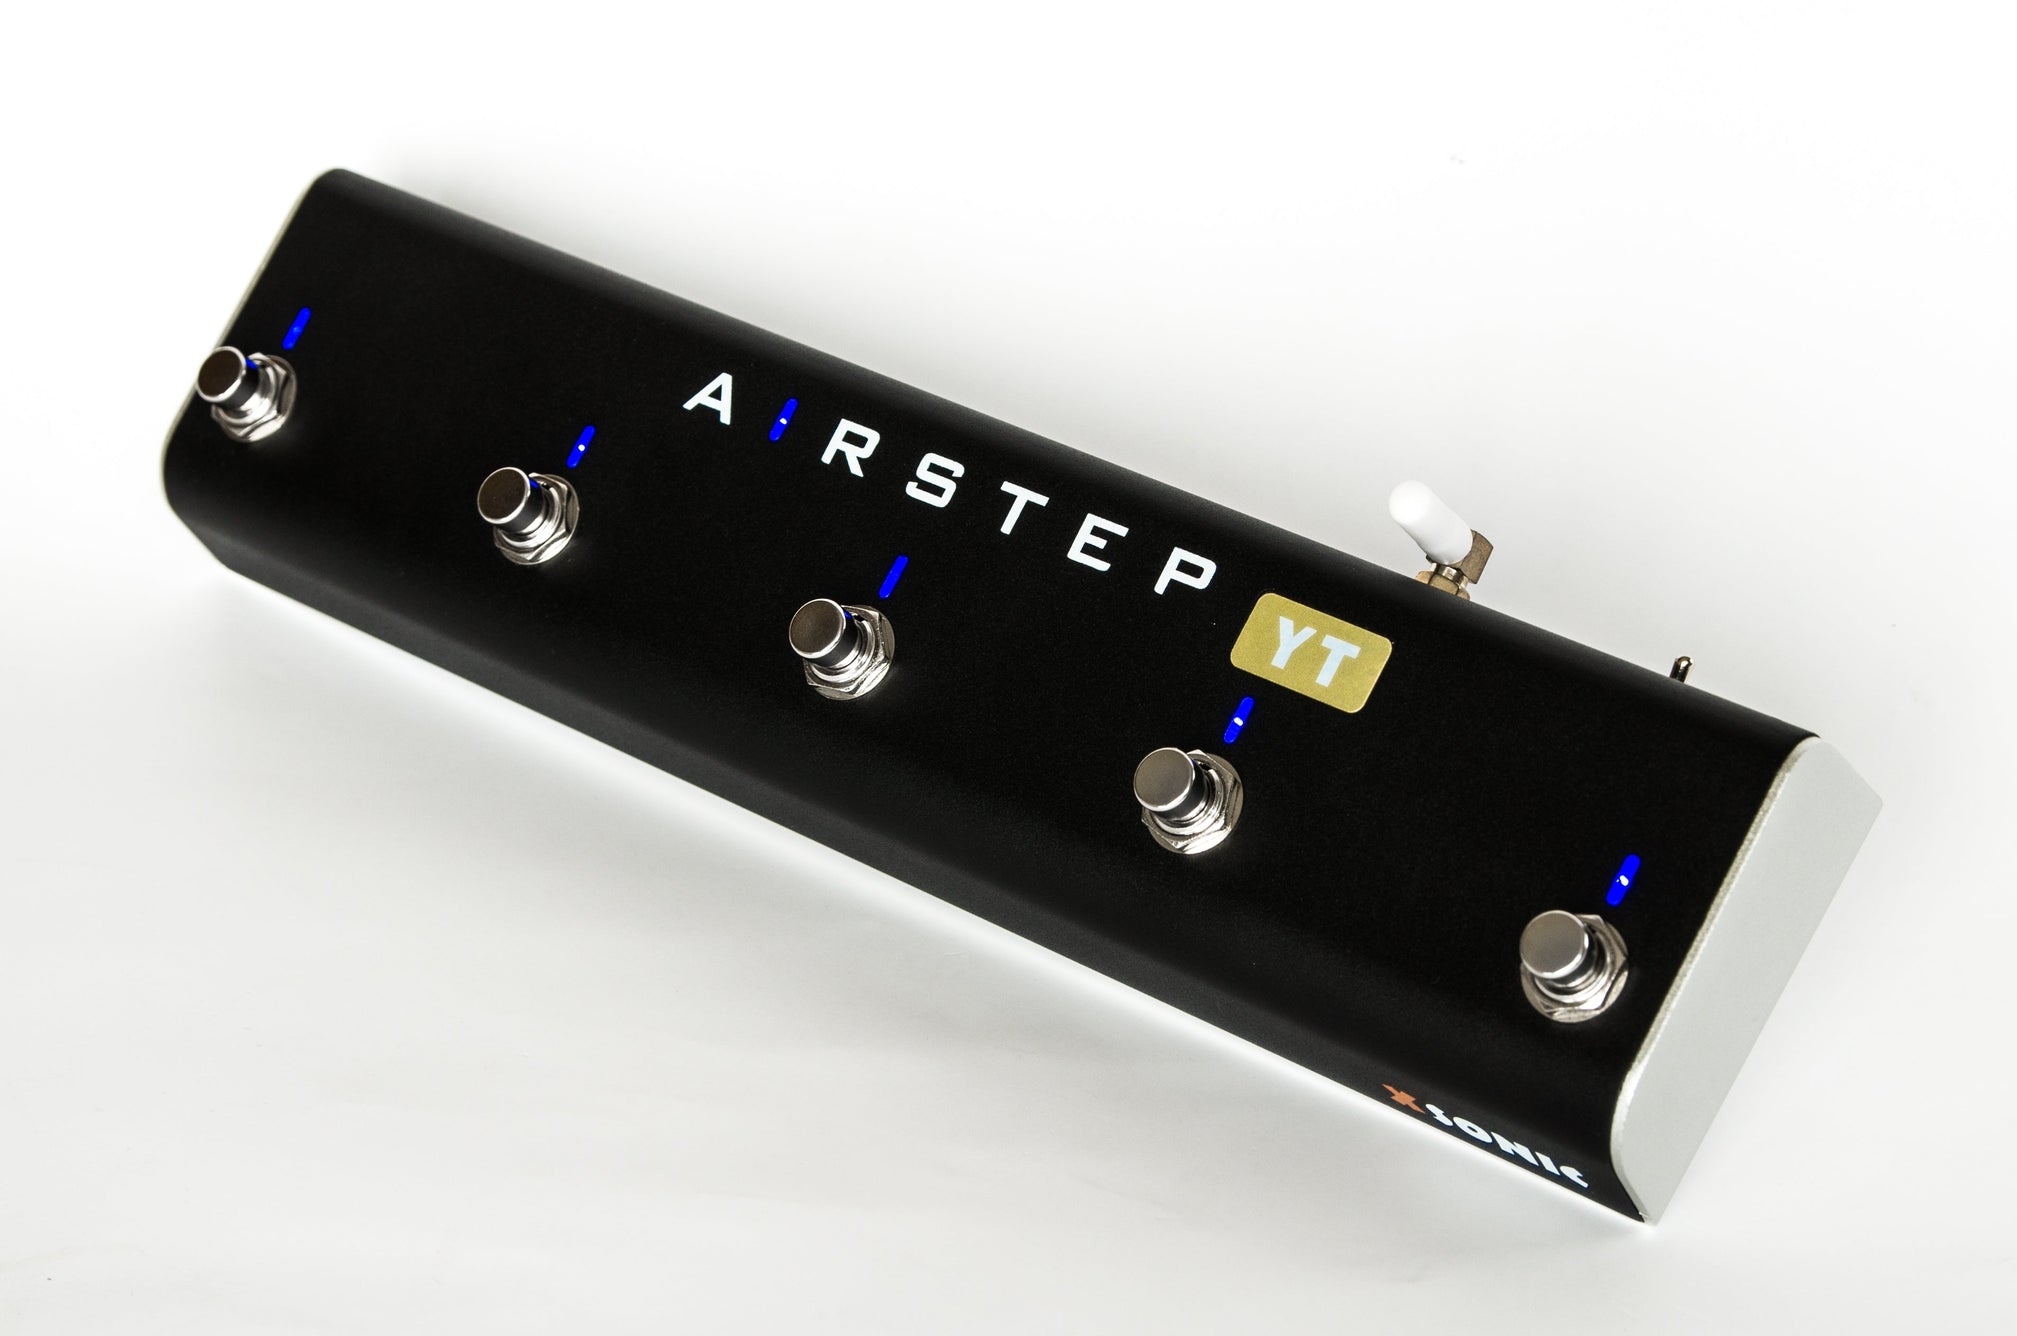 [B-Stock] AIRSTEP YT Edition | THR-II Footswitch